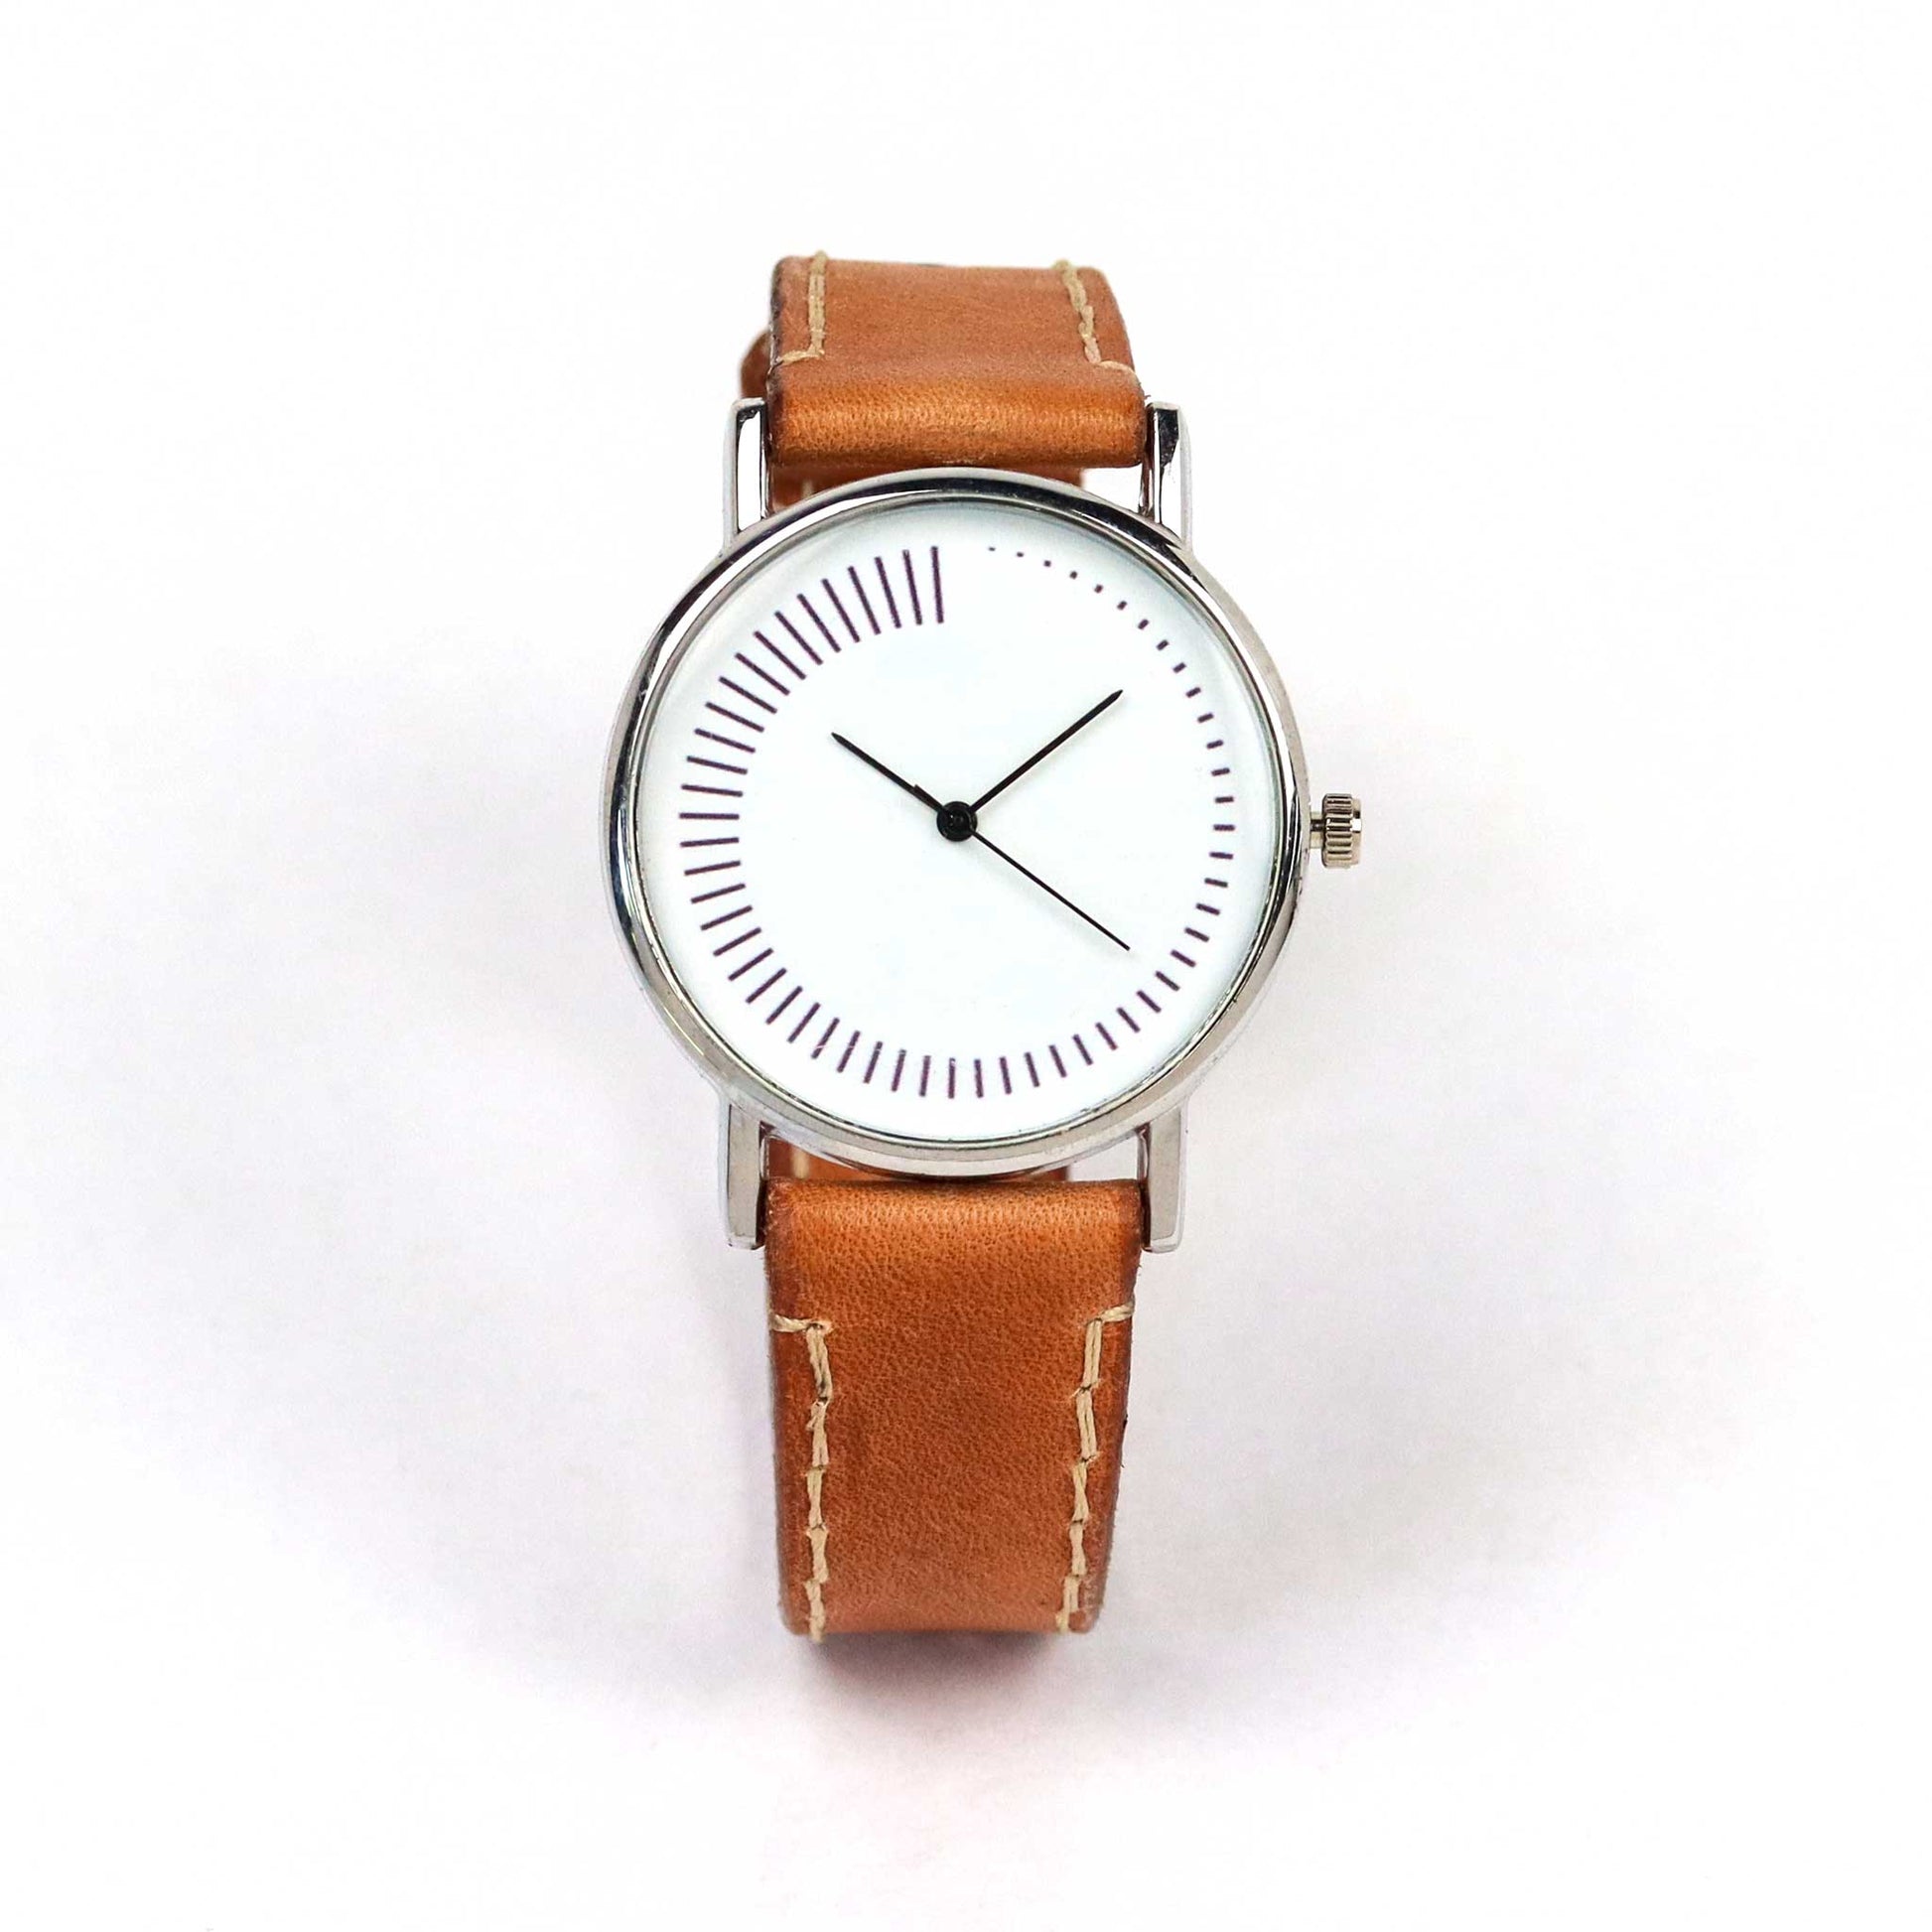 minimal watch design without numbers and brown strap